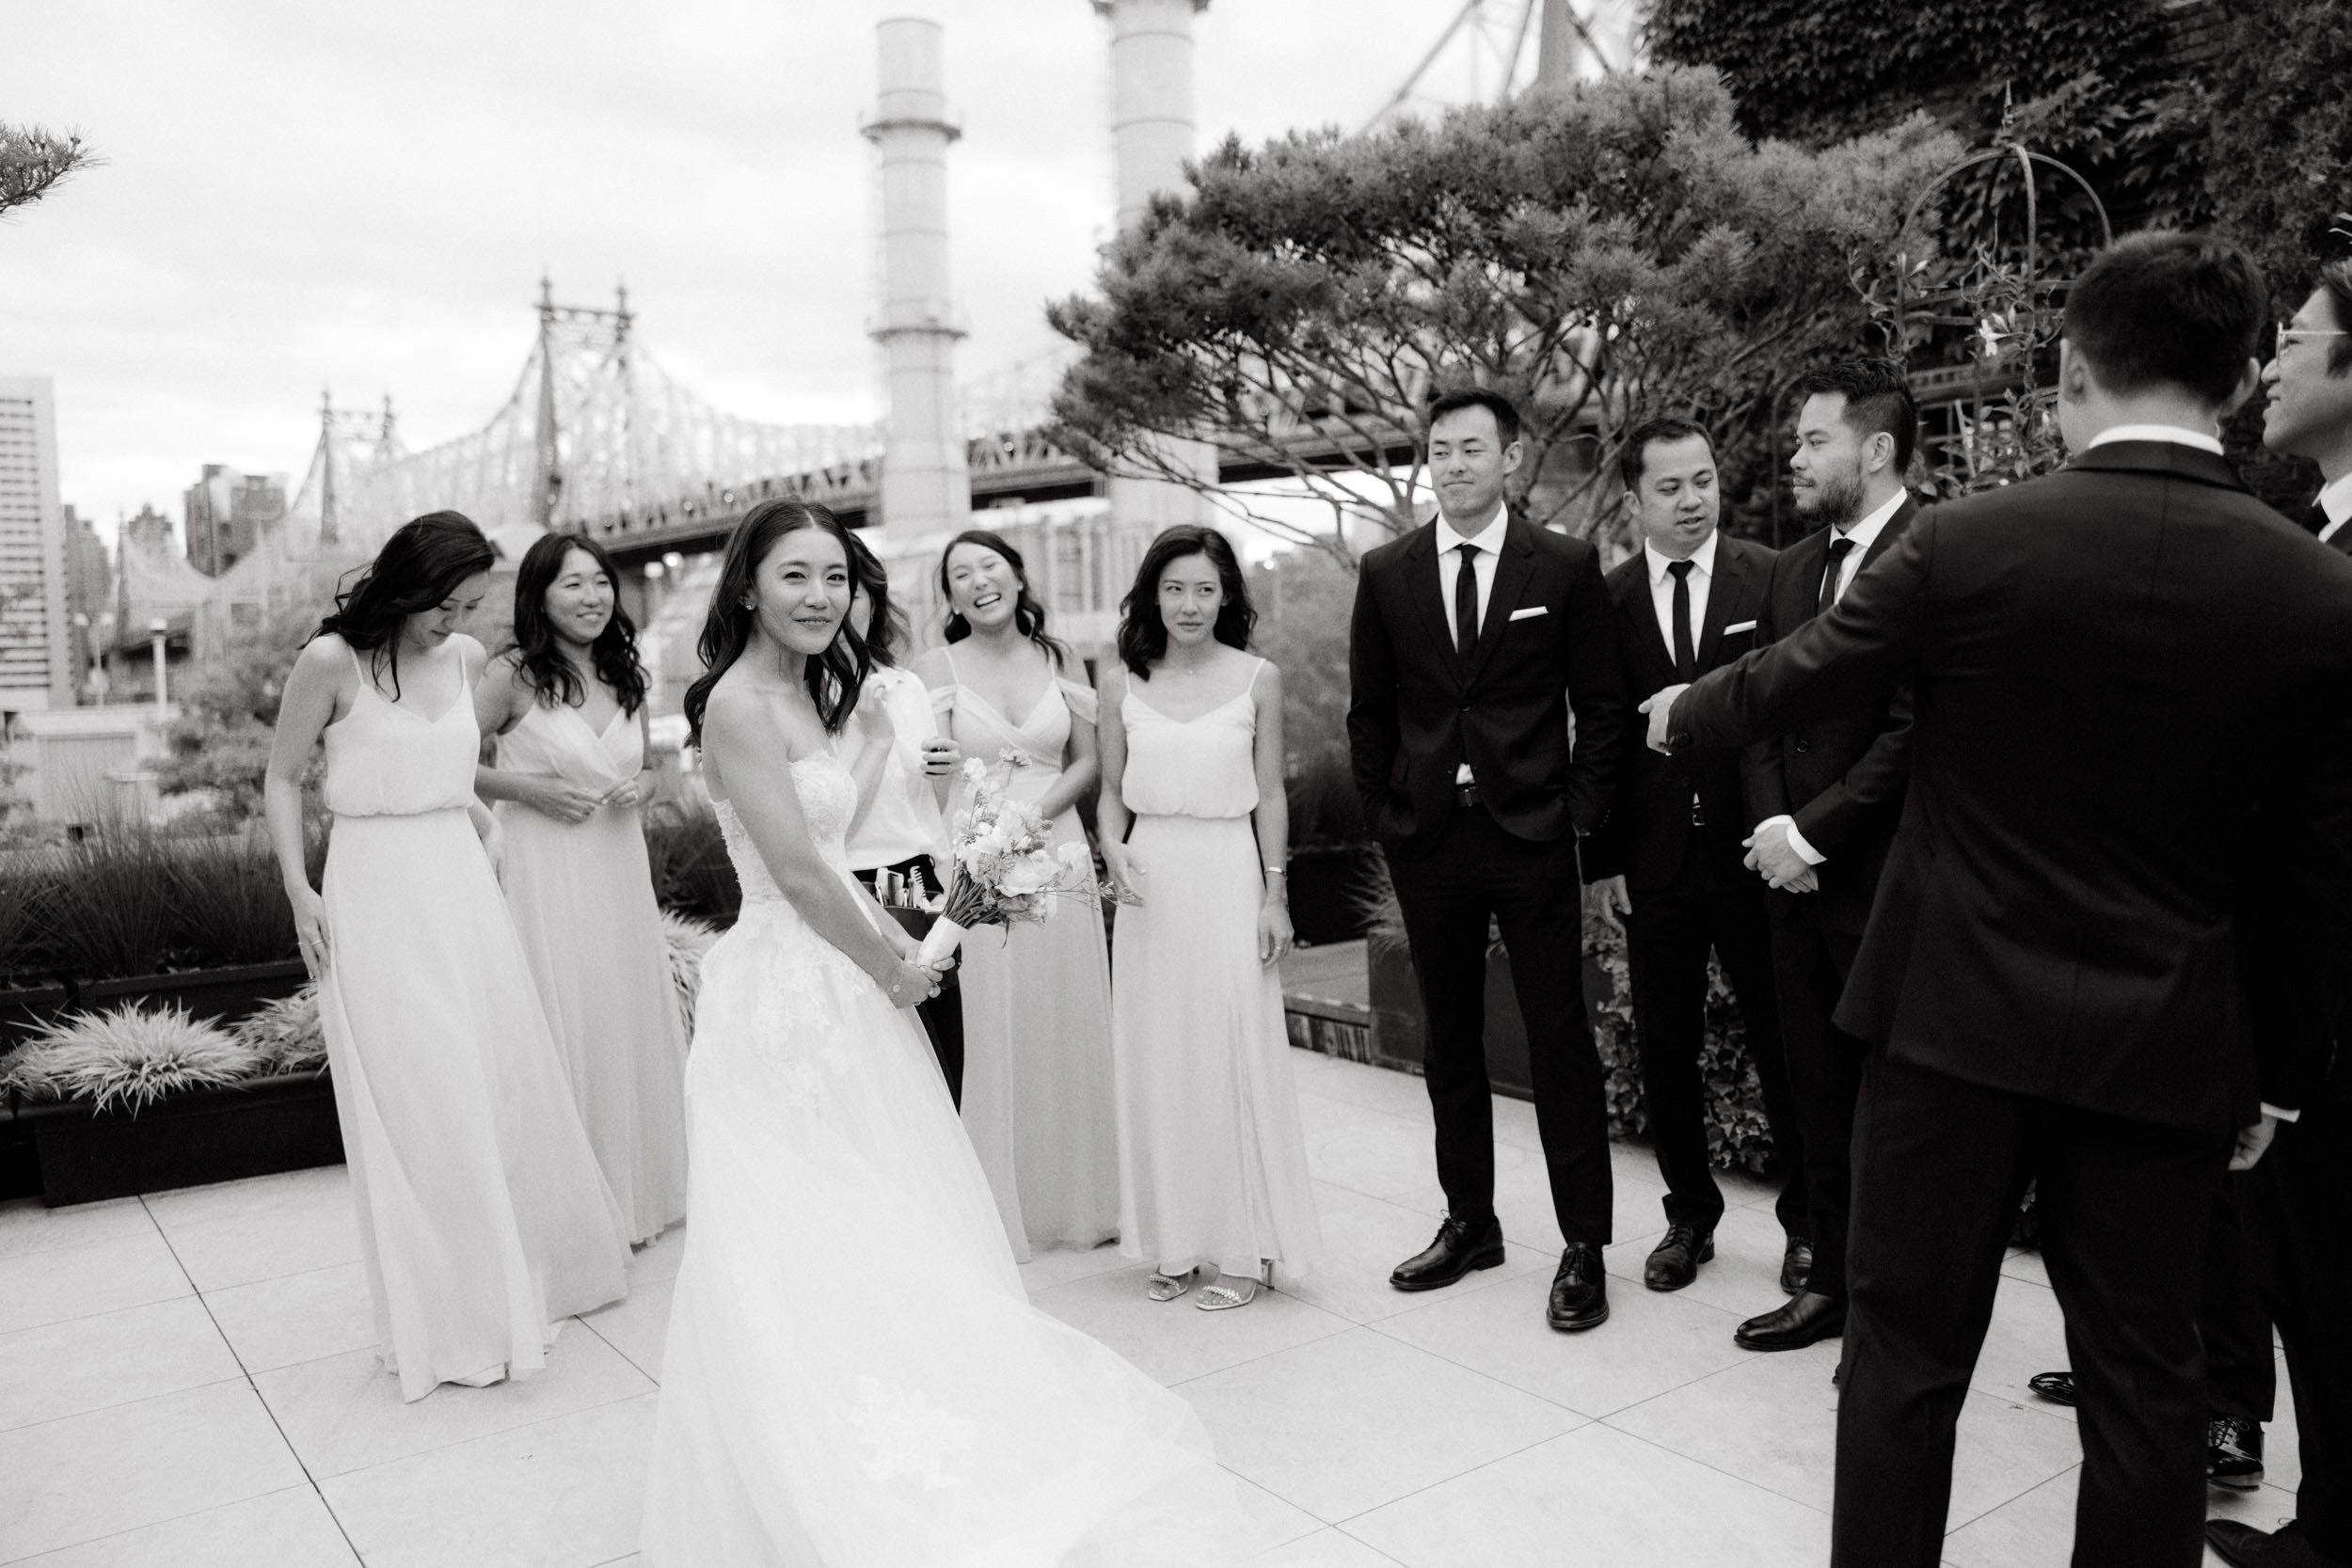 The bride, groom, bridesmaids, and groomsmen are chatting happily. Photojournalistic Photography by Jenny Fu Studio